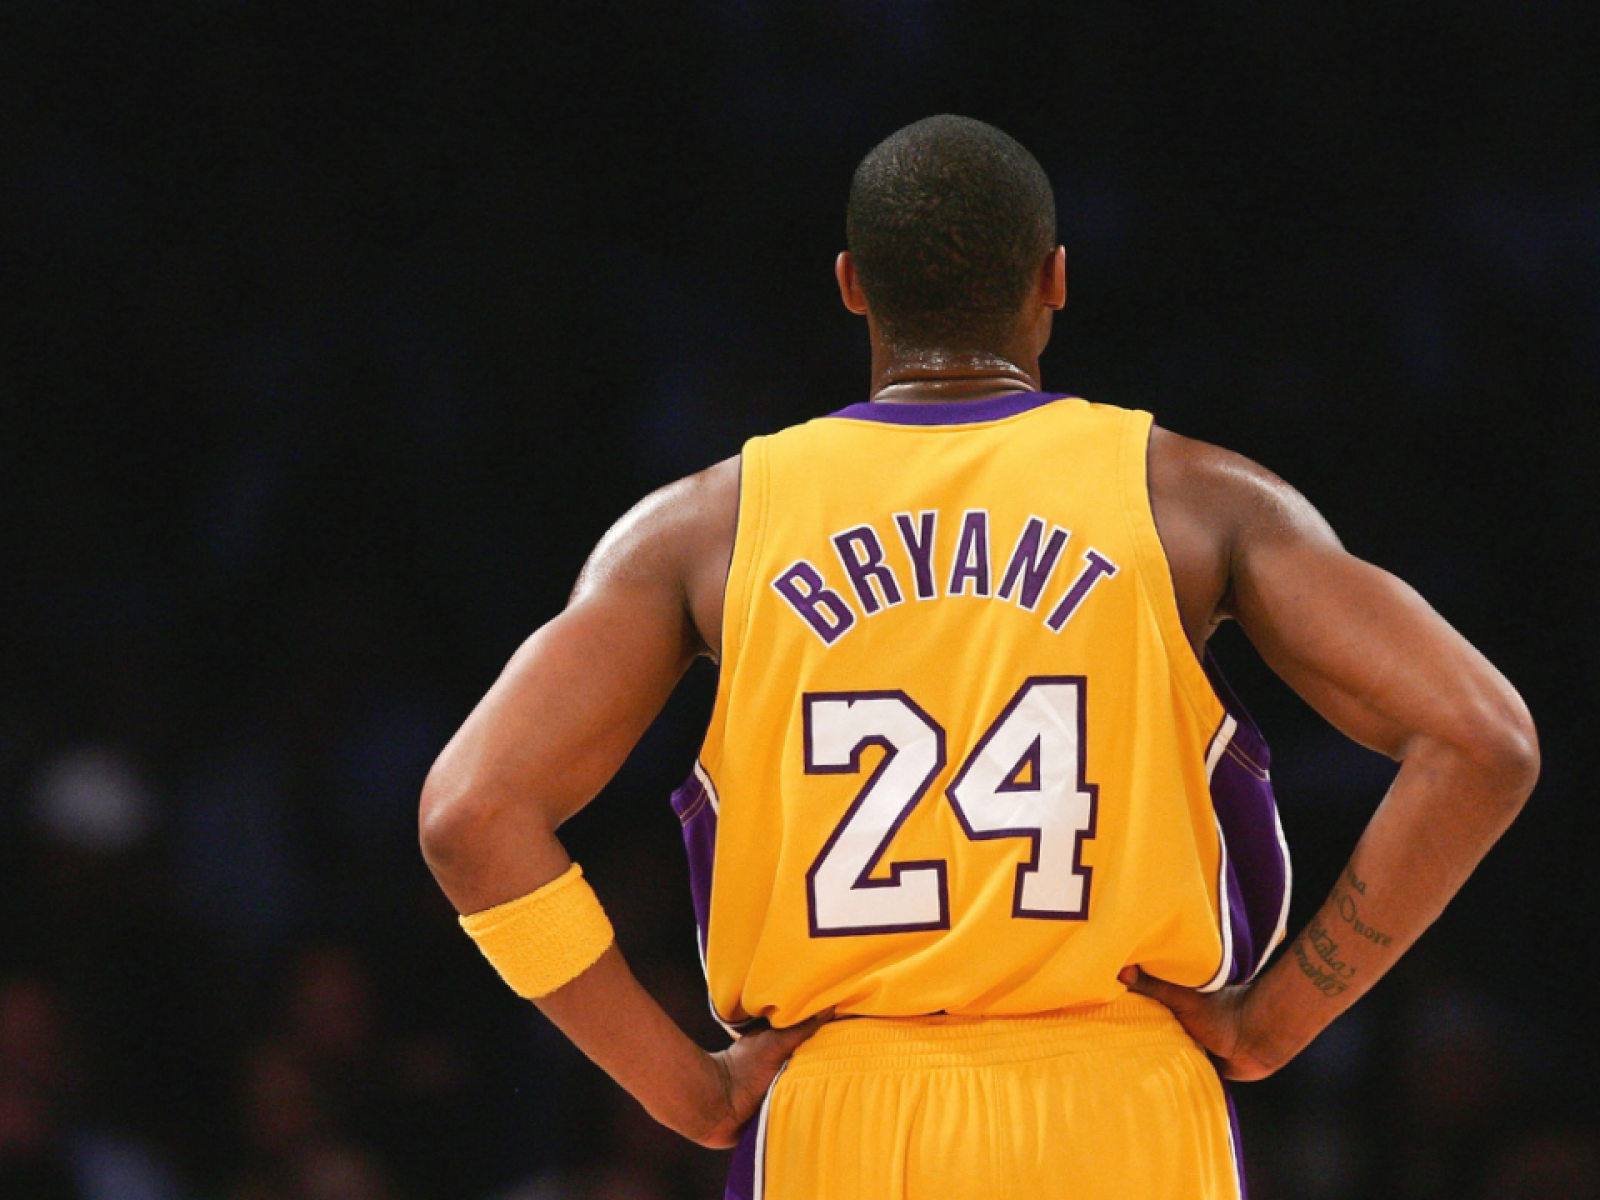 Kobe Bryant: The Life Story You May Not Know